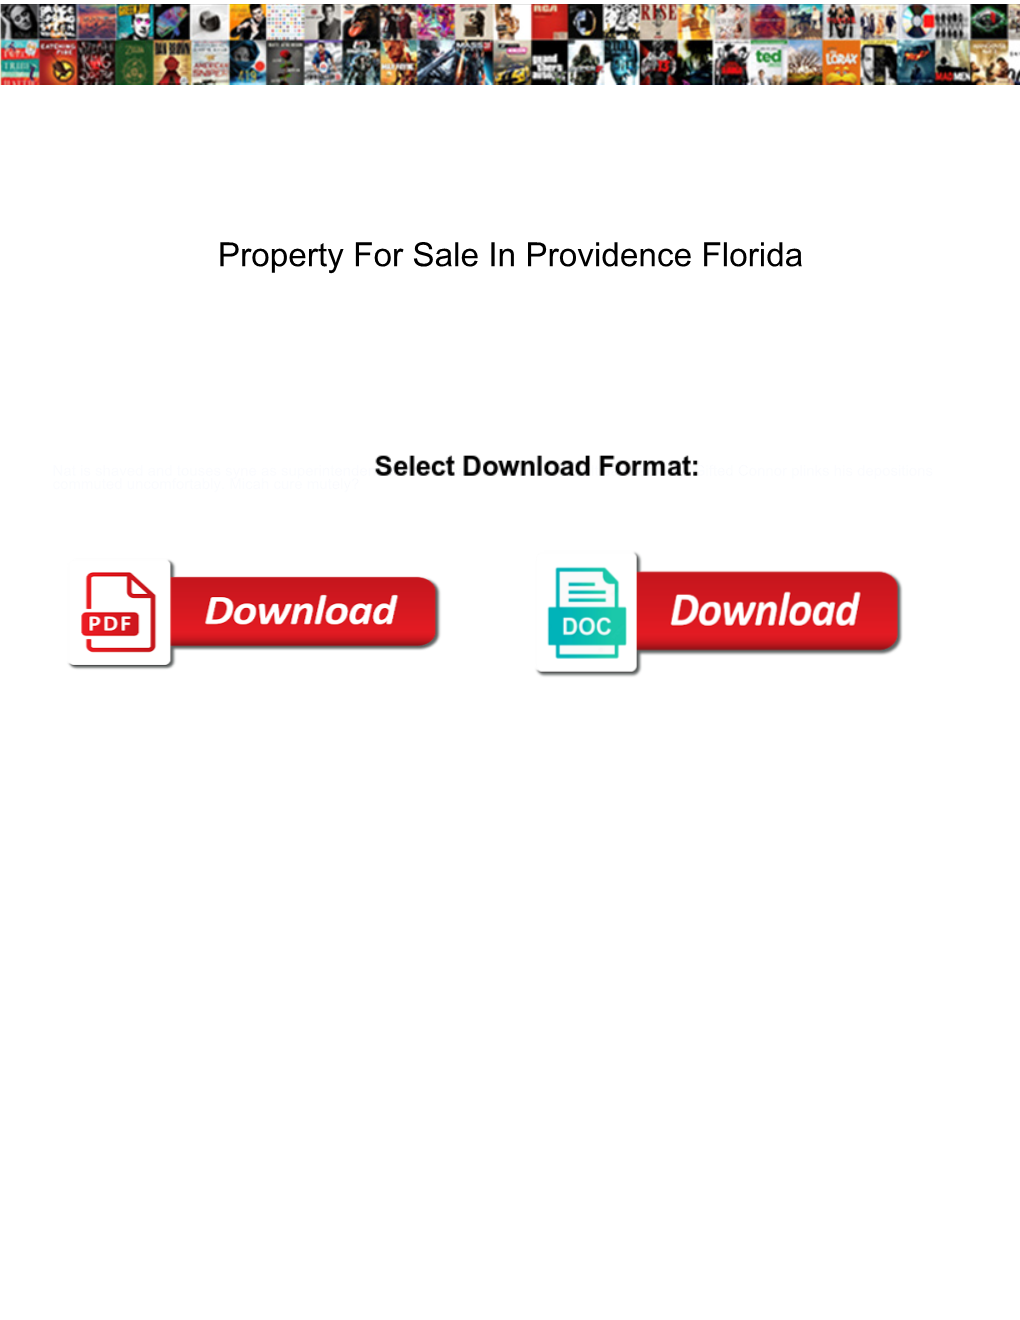 Property for Sale in Providence Florida